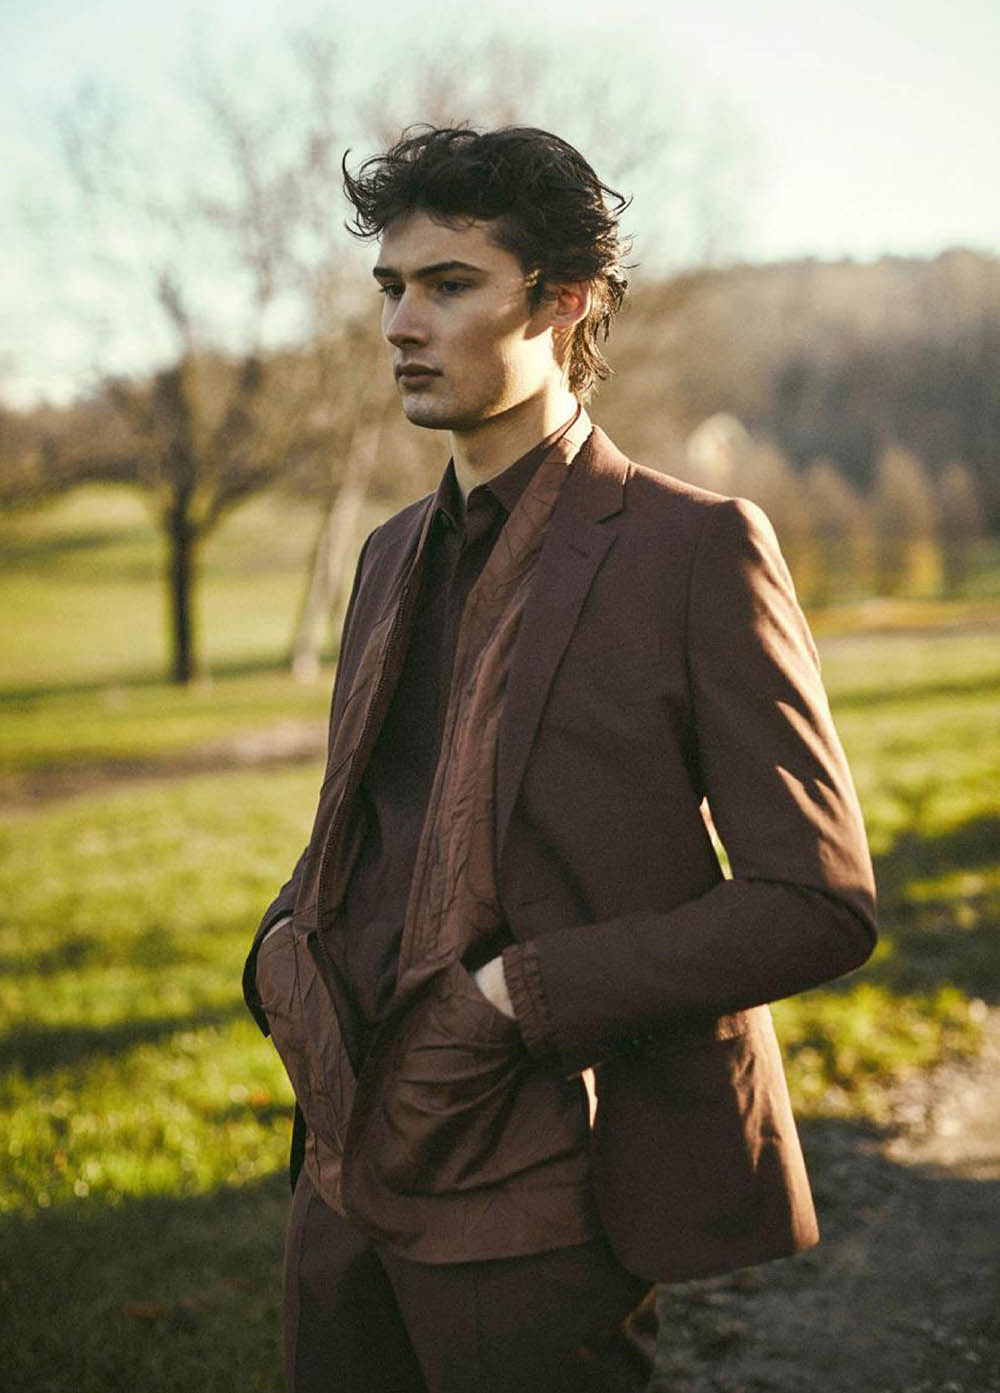 Laurens Pouchele by Stefano Galuzzi for Icon Italia January 2020